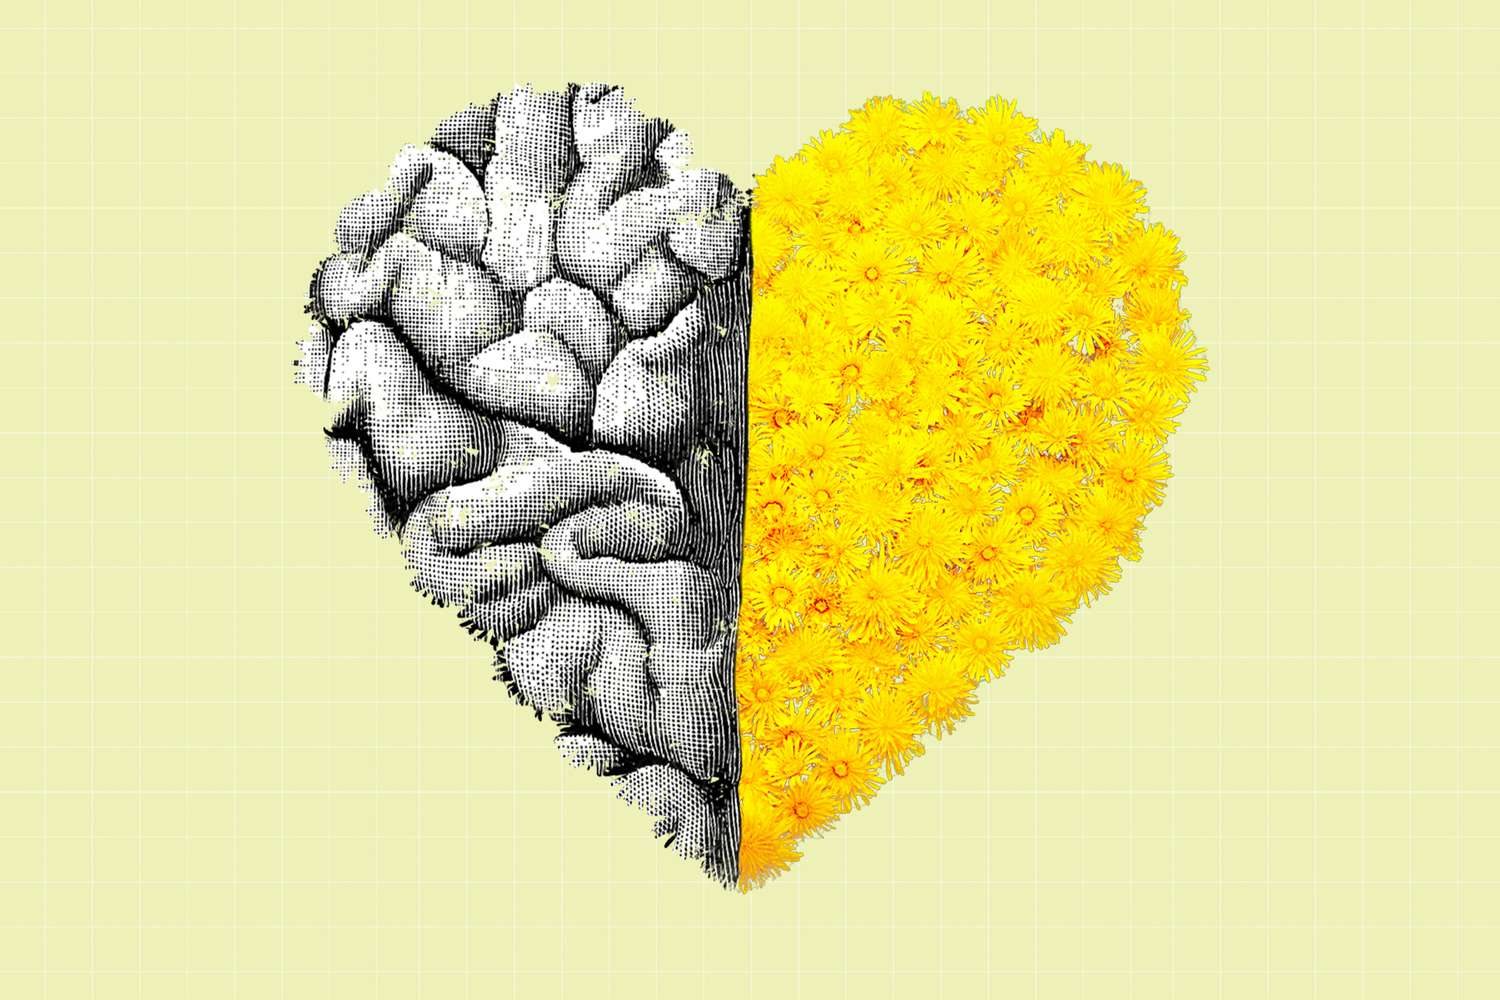 a heart made up of flowers and the texture of a brain on a designed background